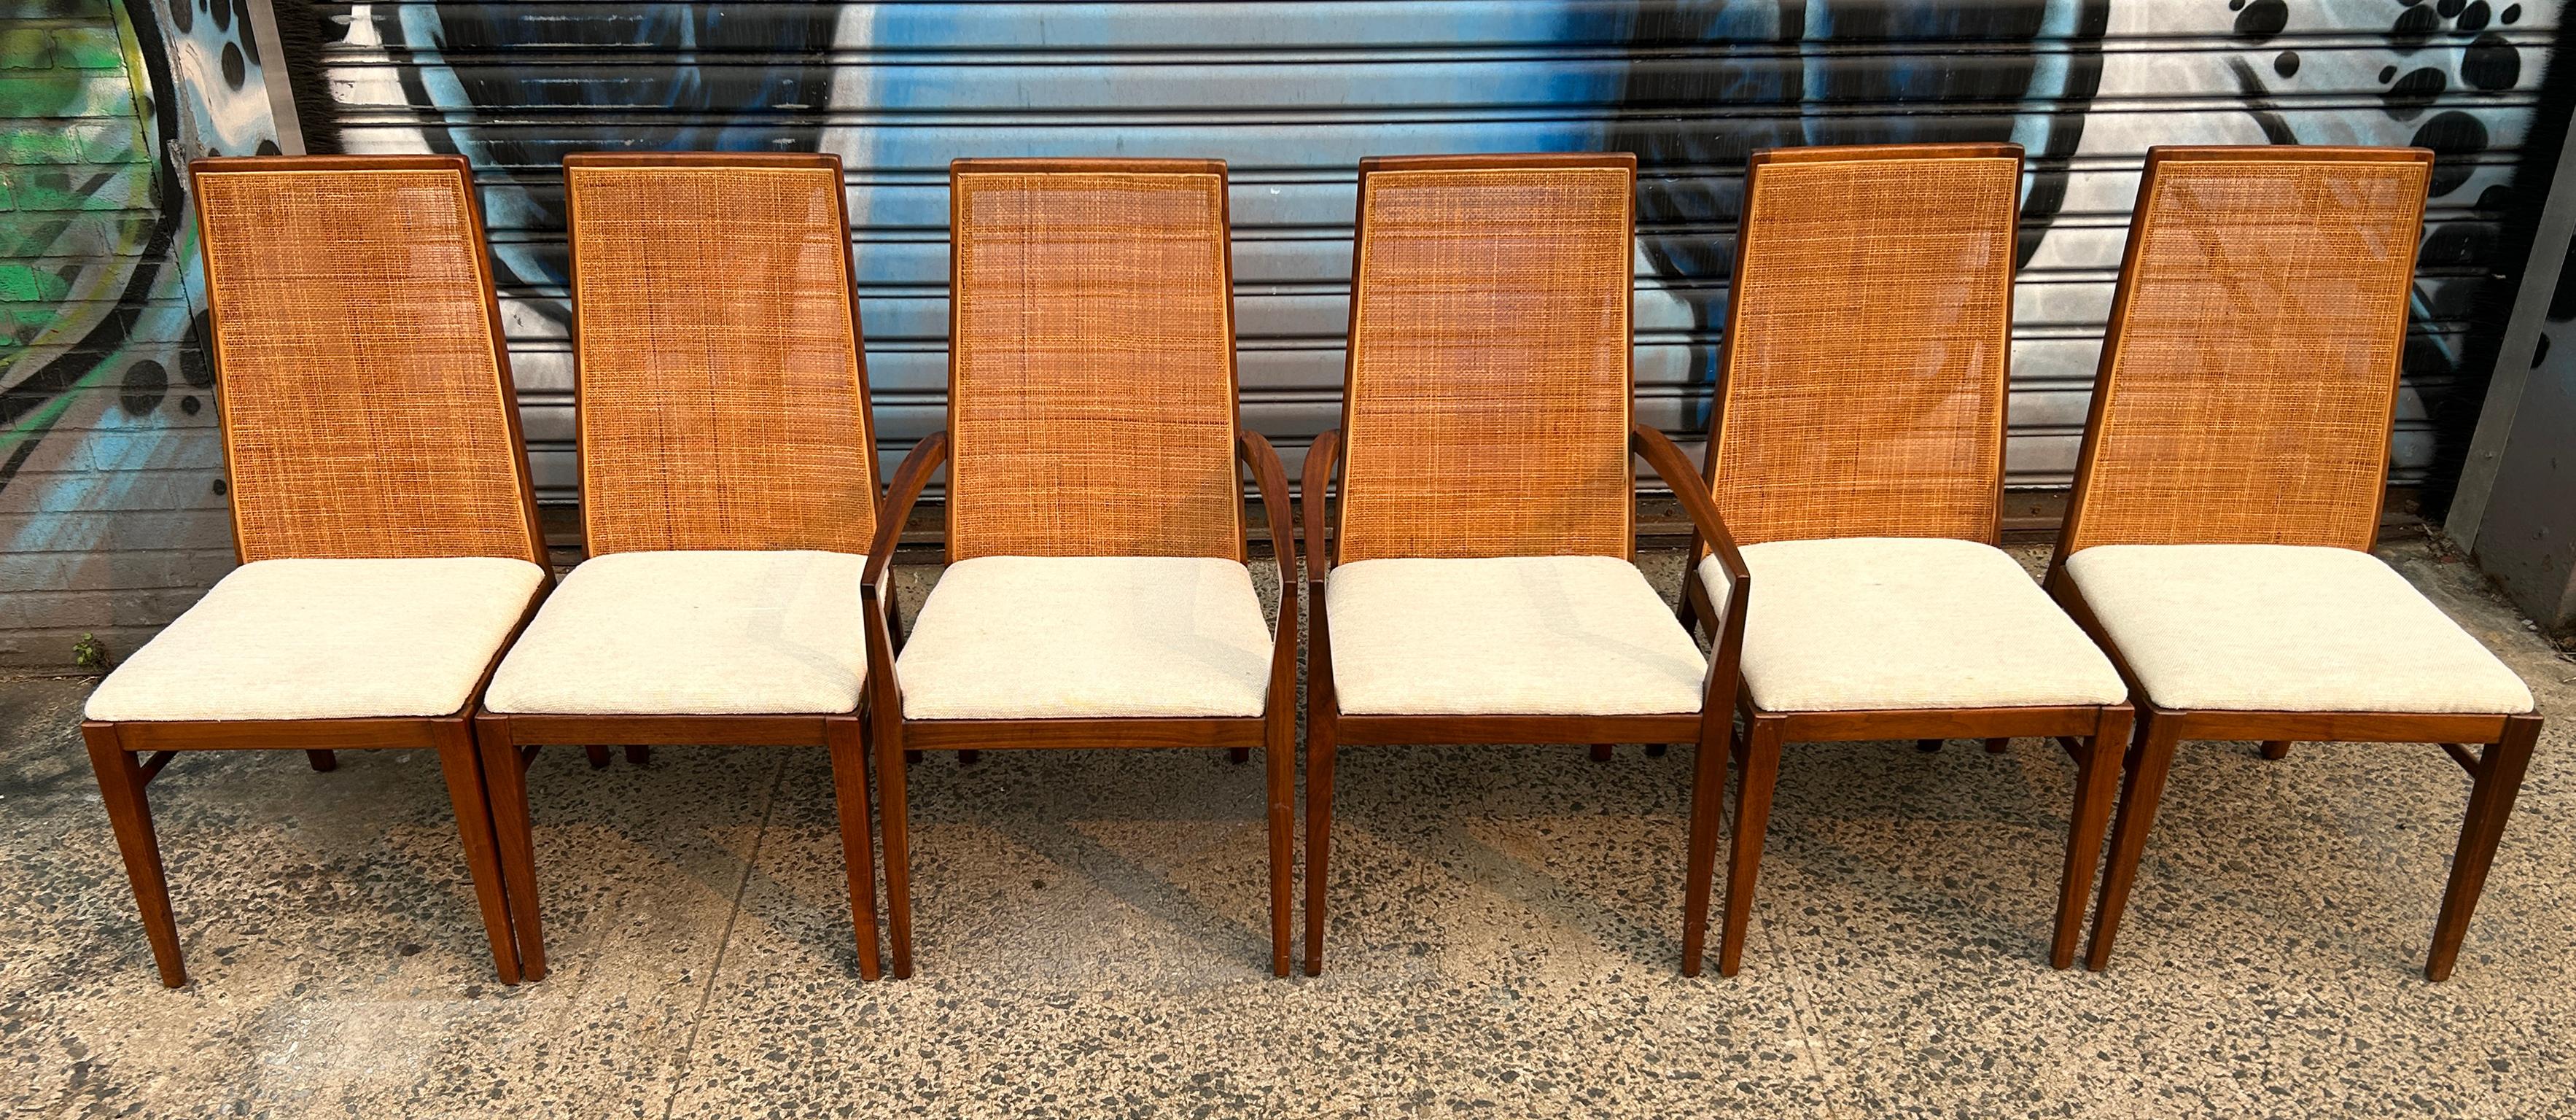 Beautiful set of 6 Mid-Century Modern tapered high back cane dining chairs. (4) of the chair have no arms and (2) chairs have arms - all have all the same white wool woven upholstery. Beautiful simple design very comfortable. Very easy to